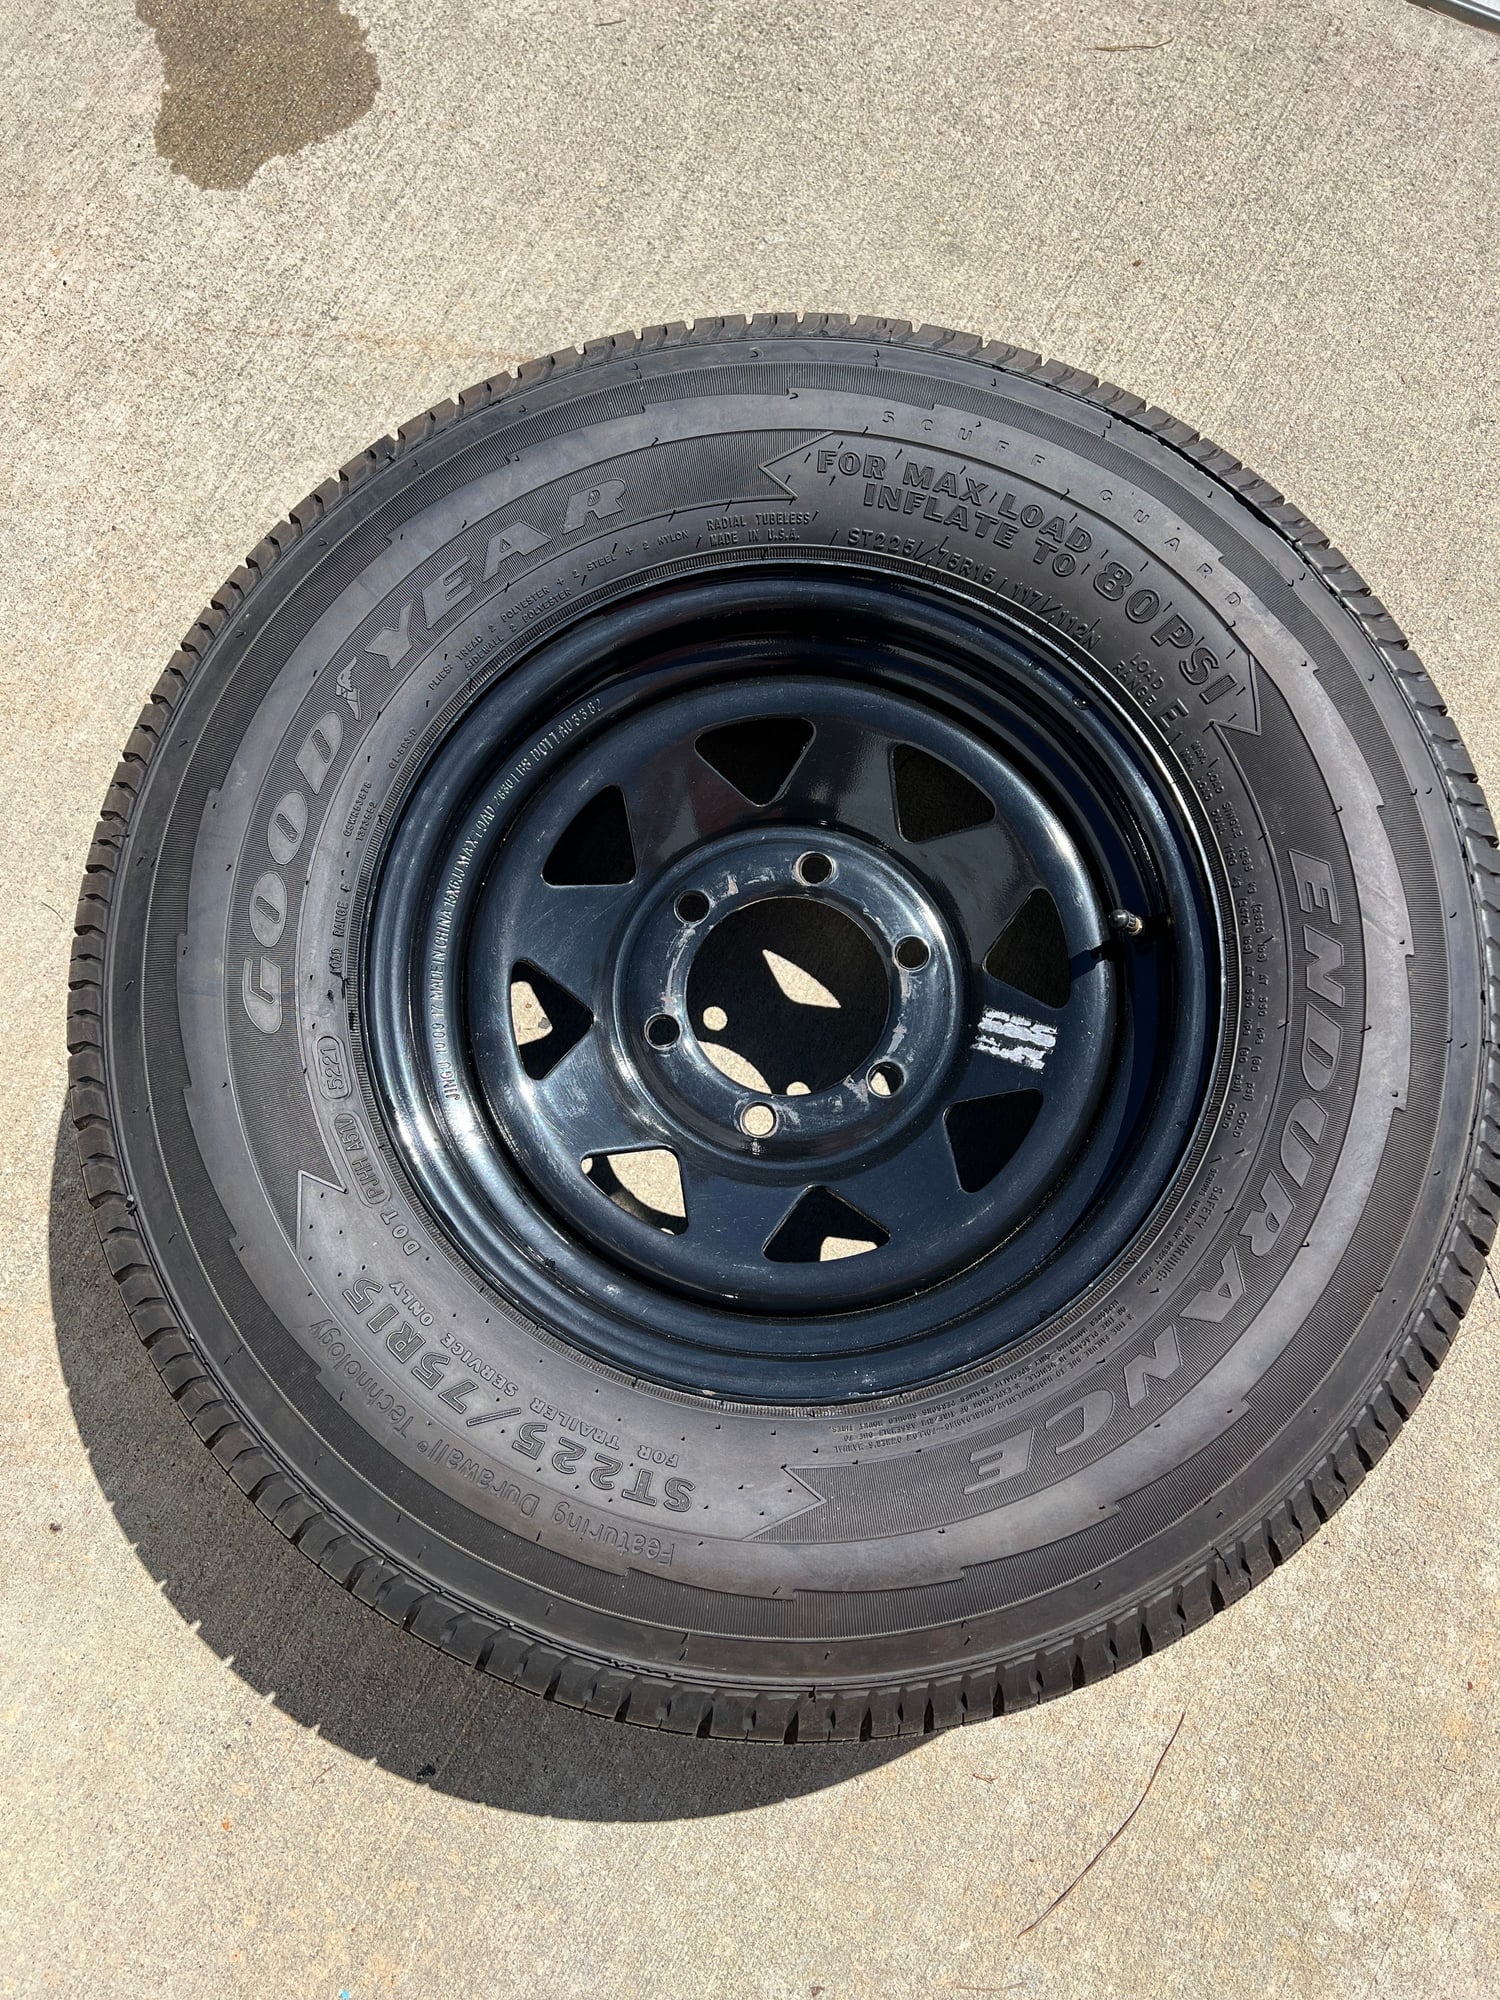 Wheels and Tires/Axles - Dexter Axle, Endurance tires, and Tredit rims - Used - 1946 to 2025 Any Make All Models - Rock Hill, SC 29730, United States